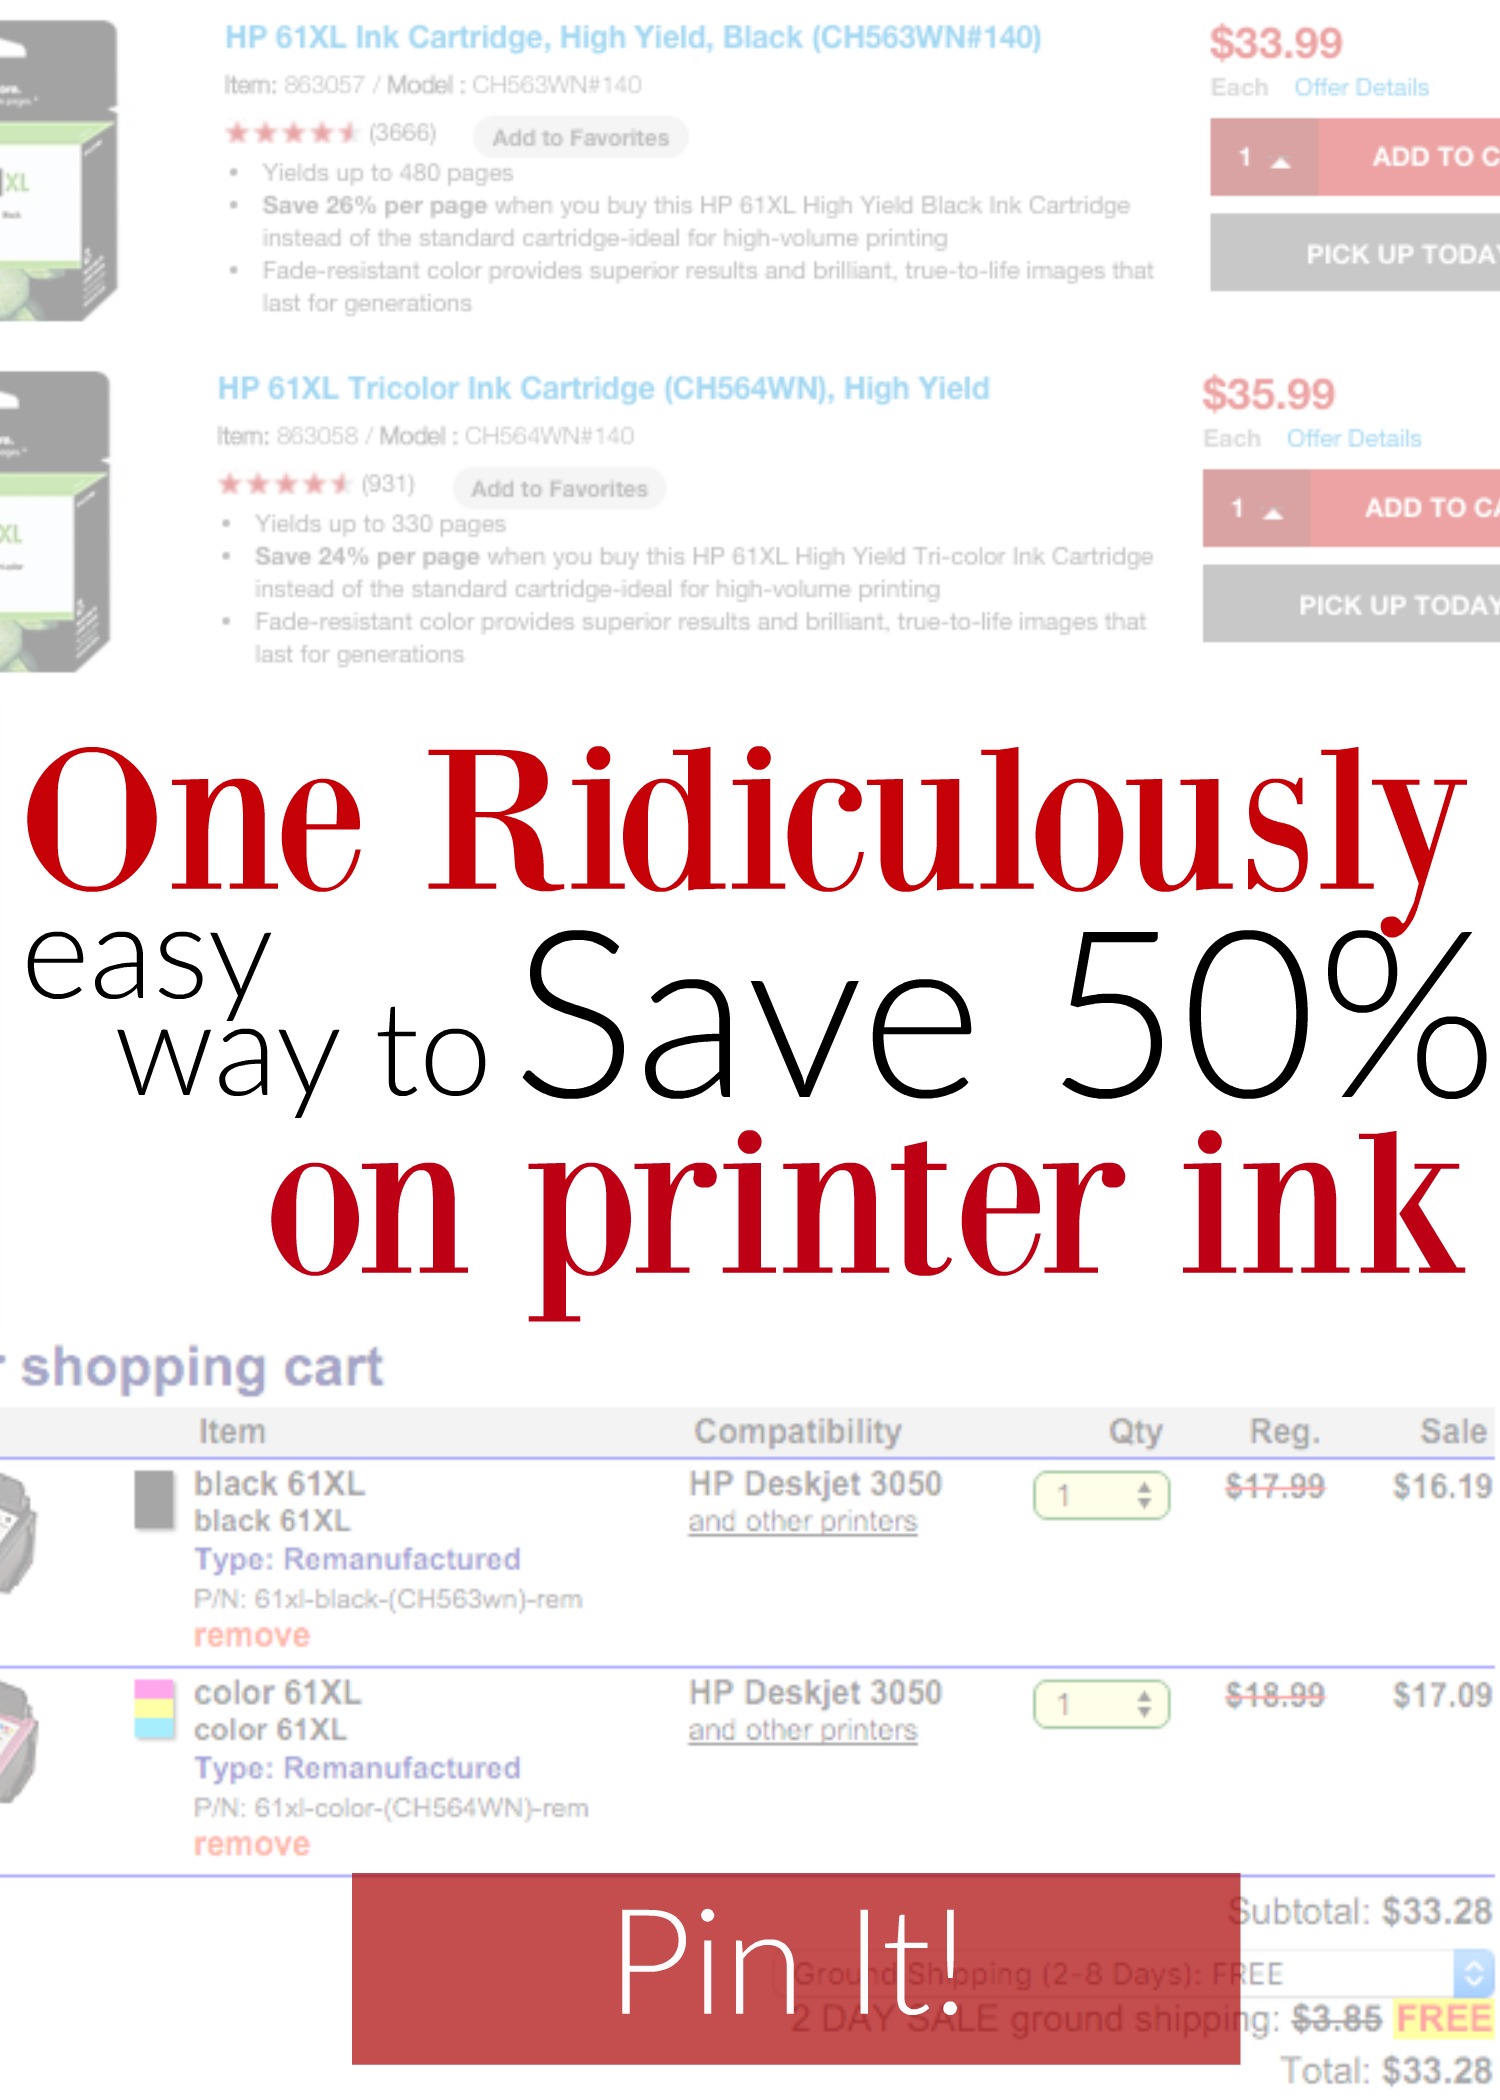 One EASY way to save on printer ink - tips you had no idea about too! This is where I get my ink from and I just saved $33 on my order of two cartridges - LOVE this! https://couponcravings.com/cheap-inkjet-printer-ink-as-low-as-5-35cartridge-shipped/